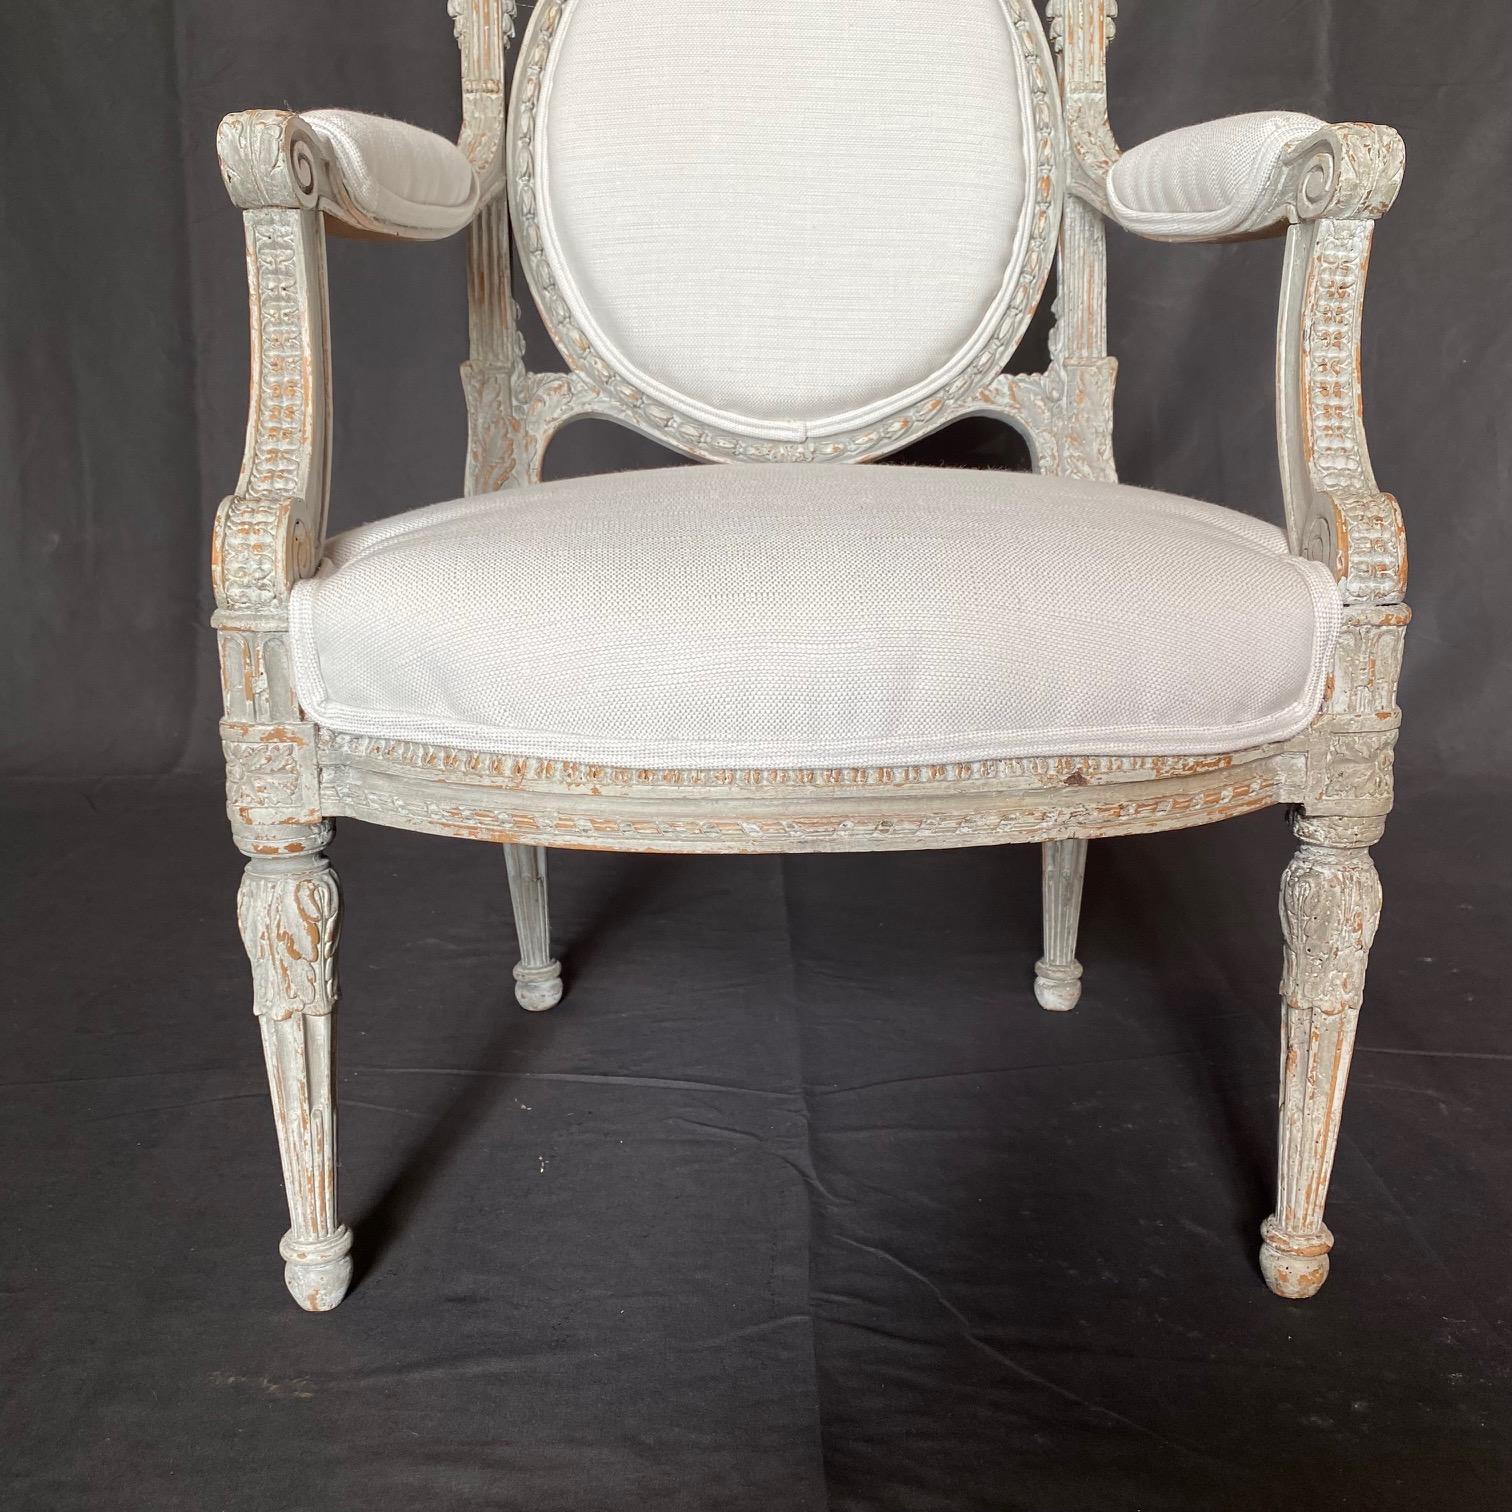 Sublimely pretty French carved and grey white painted Louis XVI fauteuil or armchair having oval back inset into intricately carved frame, with seats and armrests newly upholstered in neutral high end fabric.   Beautiful reeded tapering legs finish